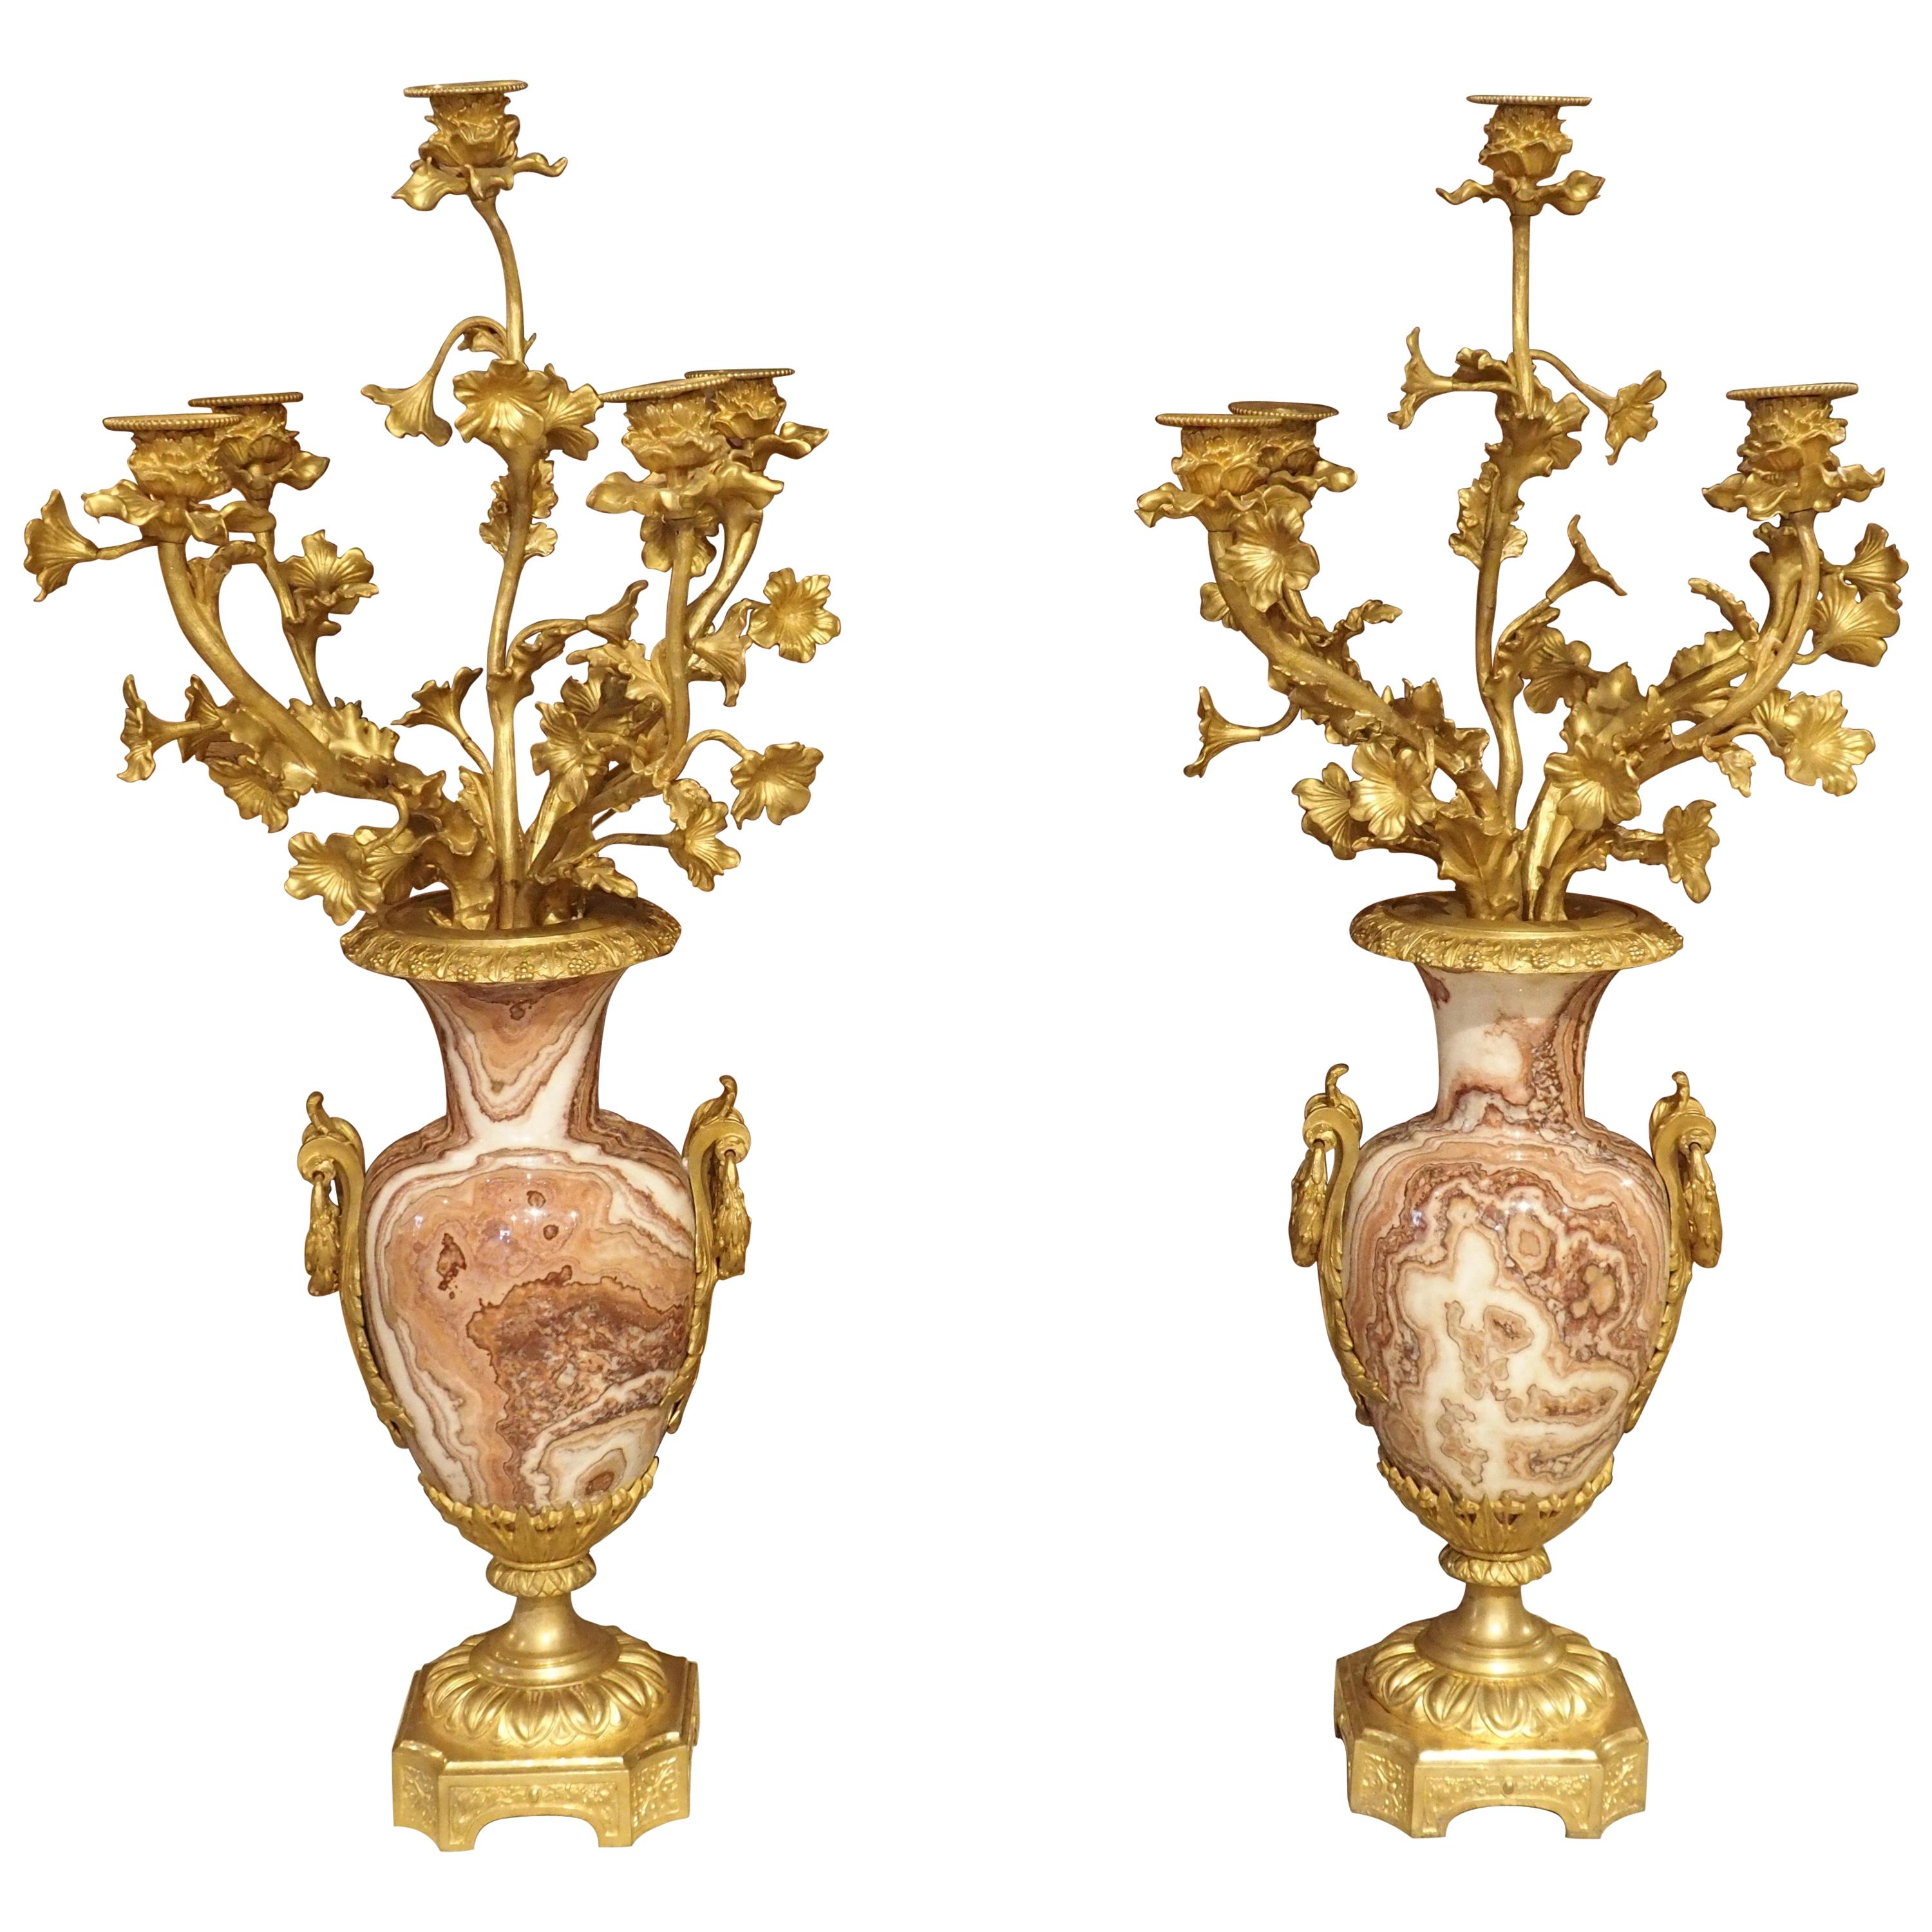 Pair of Late 19th Century French Bronze Doré Candelabras